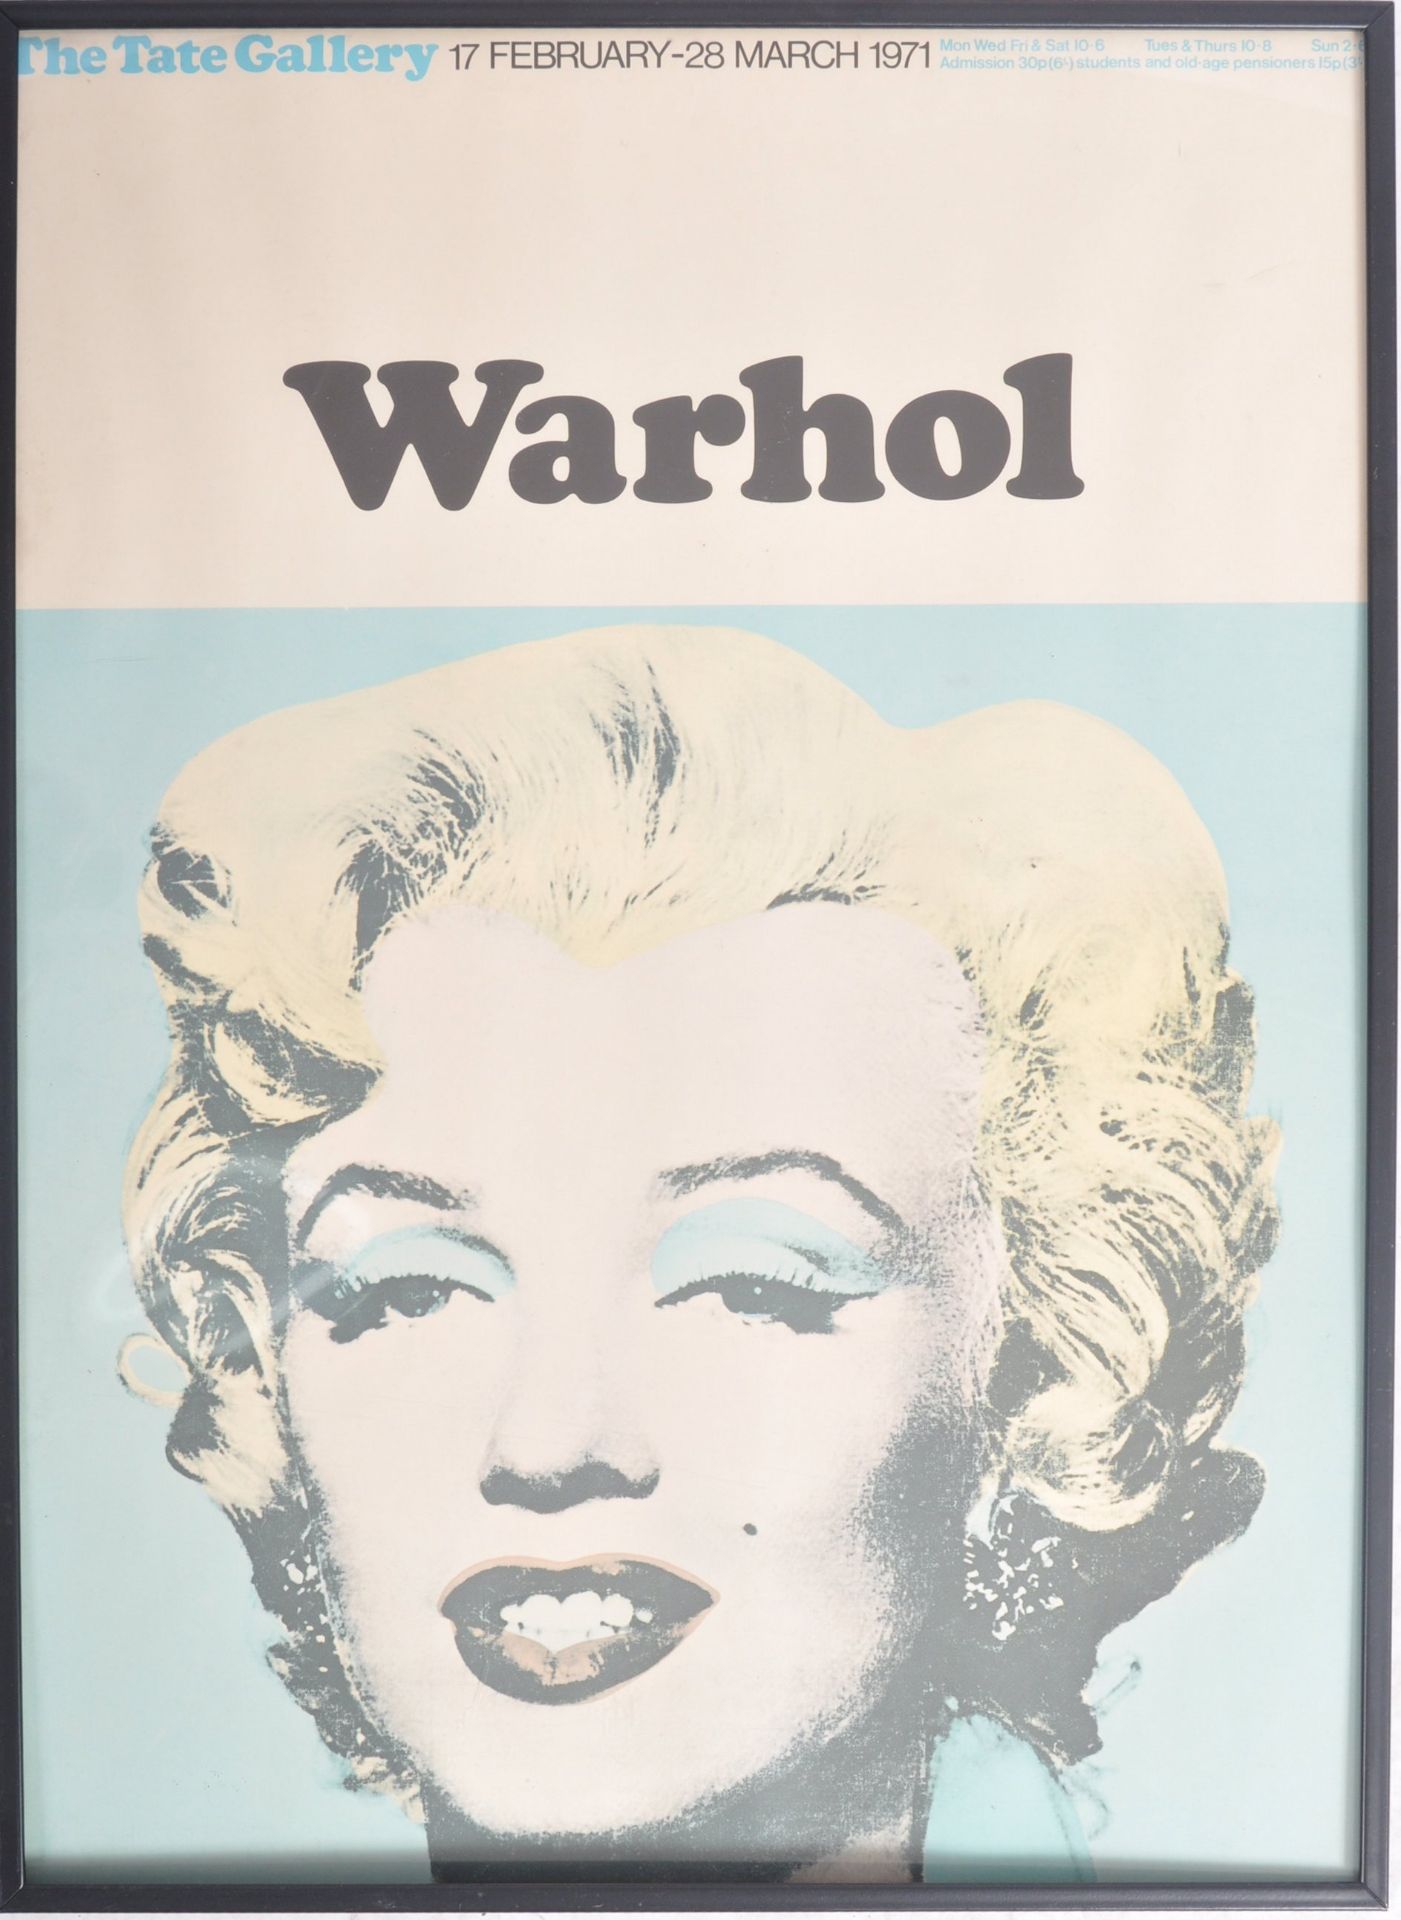 AFTER ANDY WARHOL - 1971 TATE GALLERY EXHIBITION POSTER